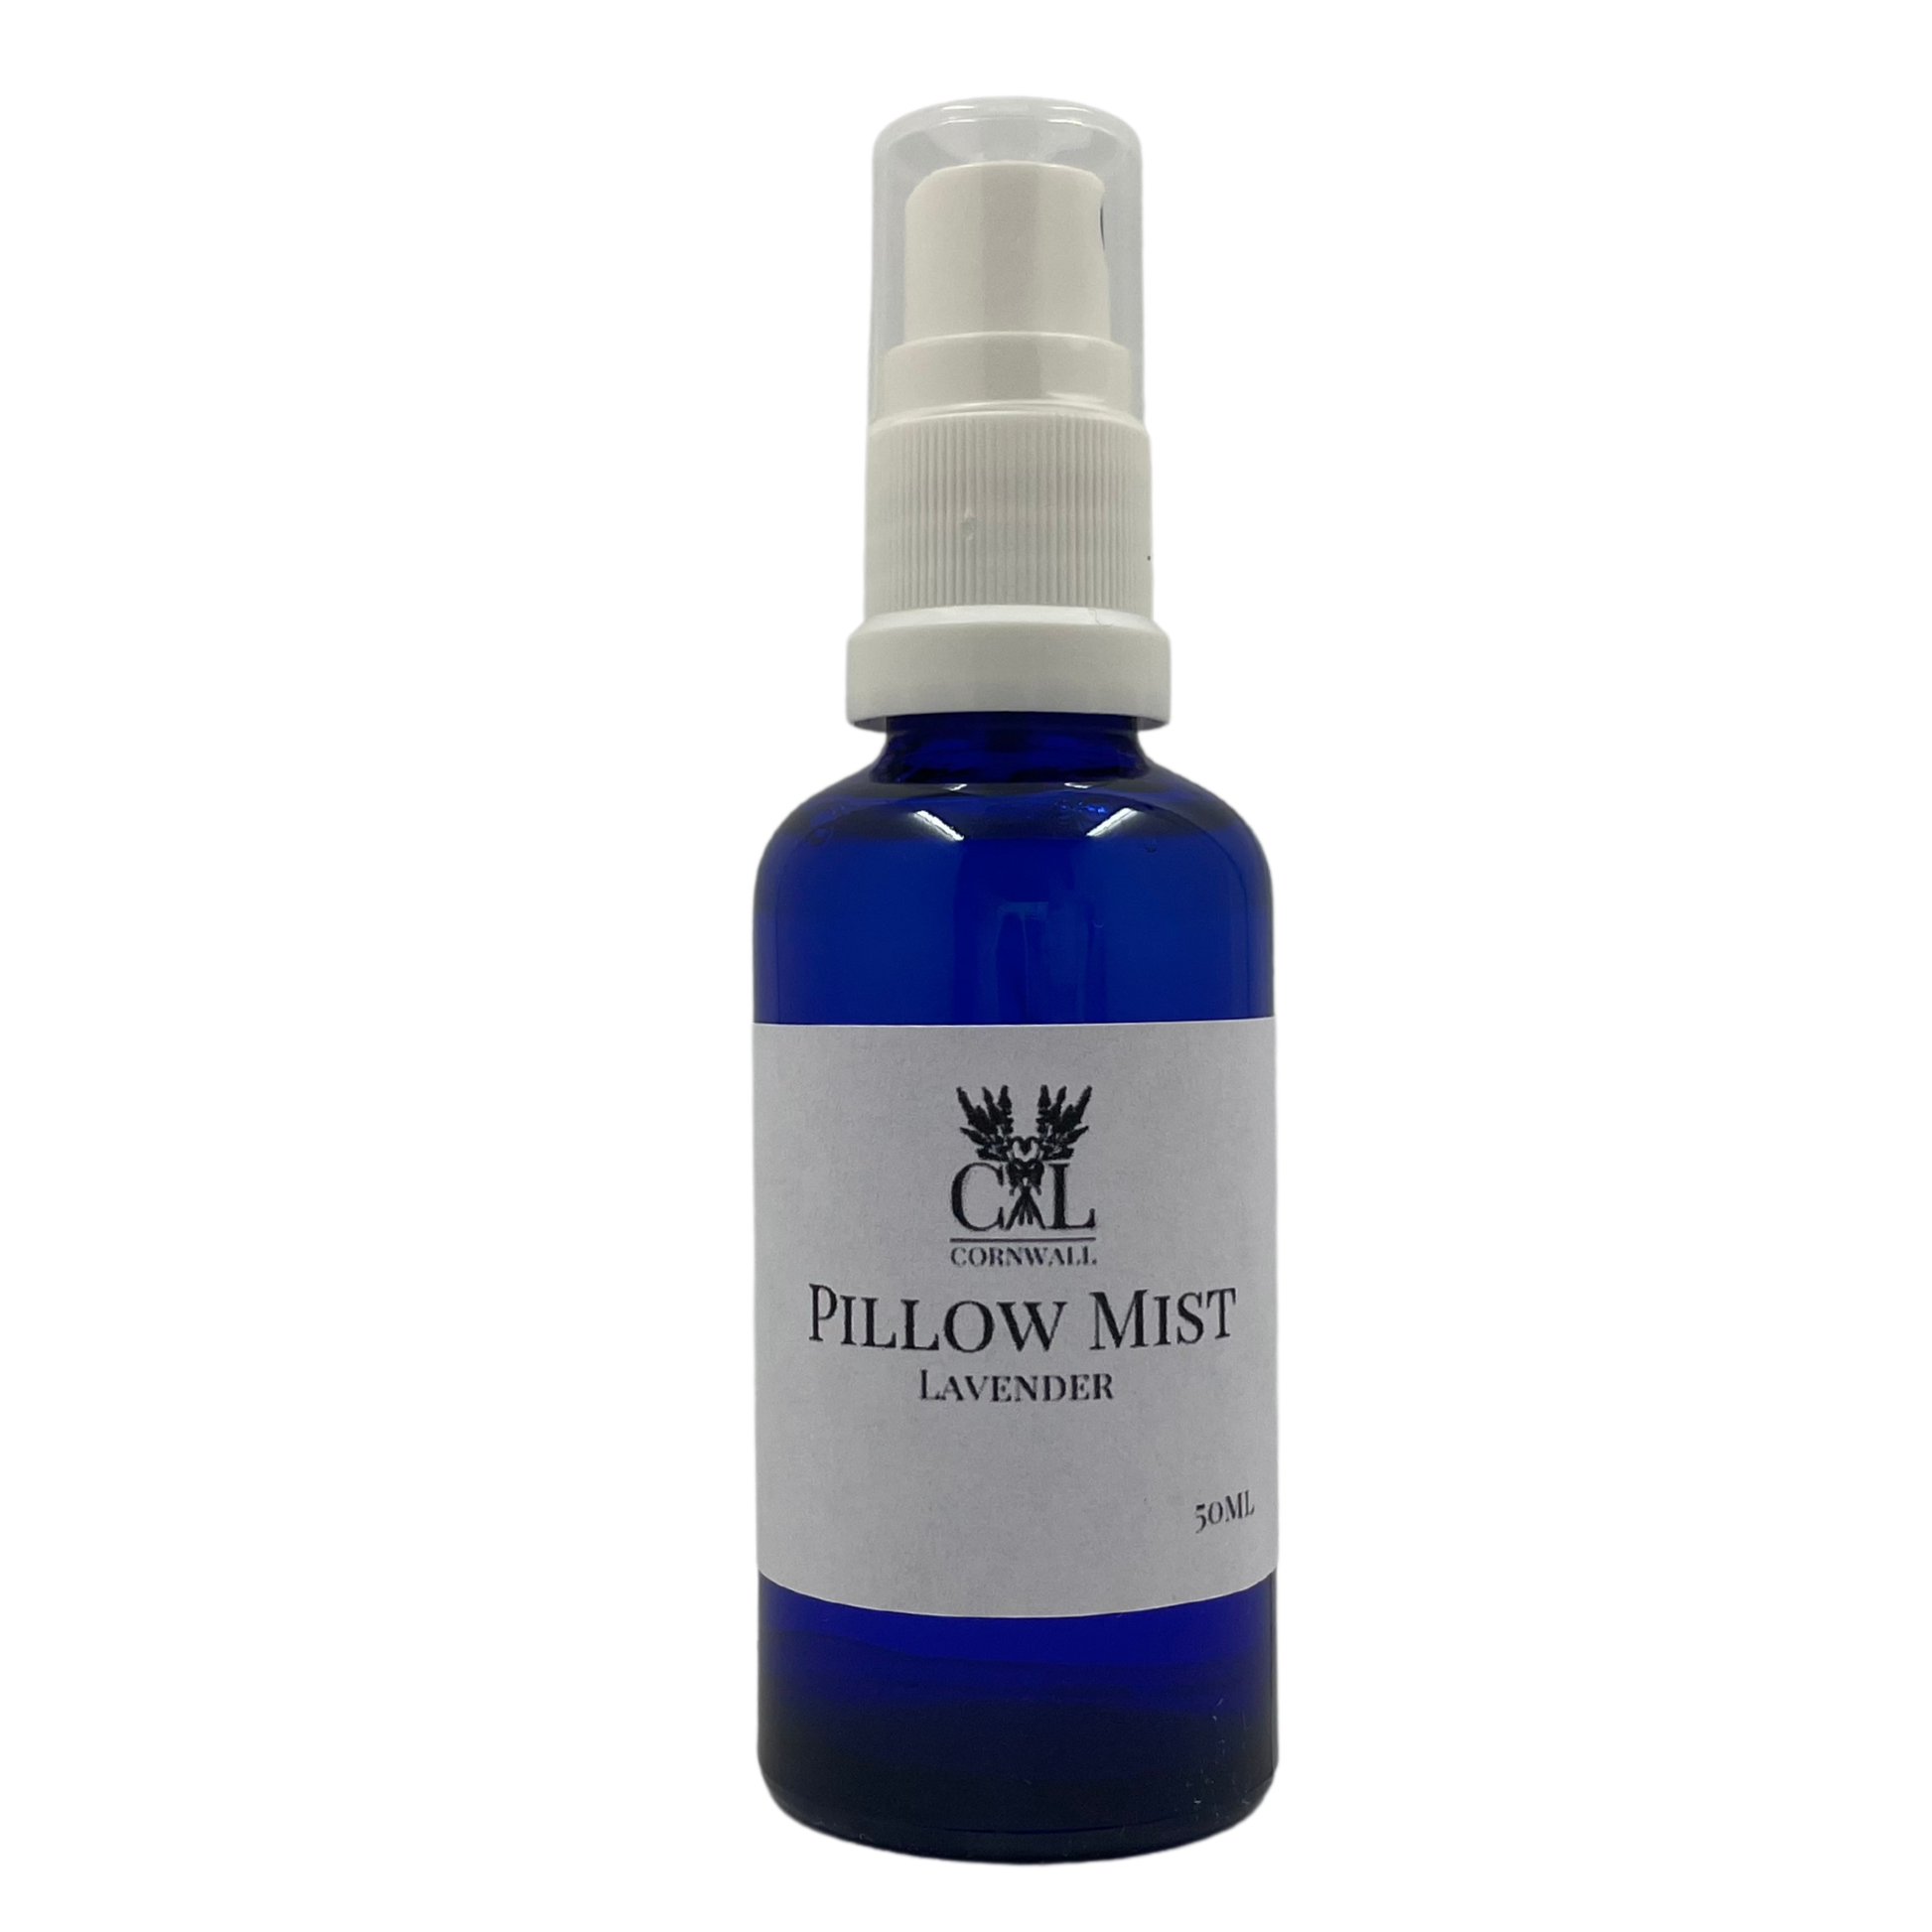 Lavender essential oil pillow mist, a few sprays onto your pillow and linen at night can help you drift away into a relaxing deep sleep.